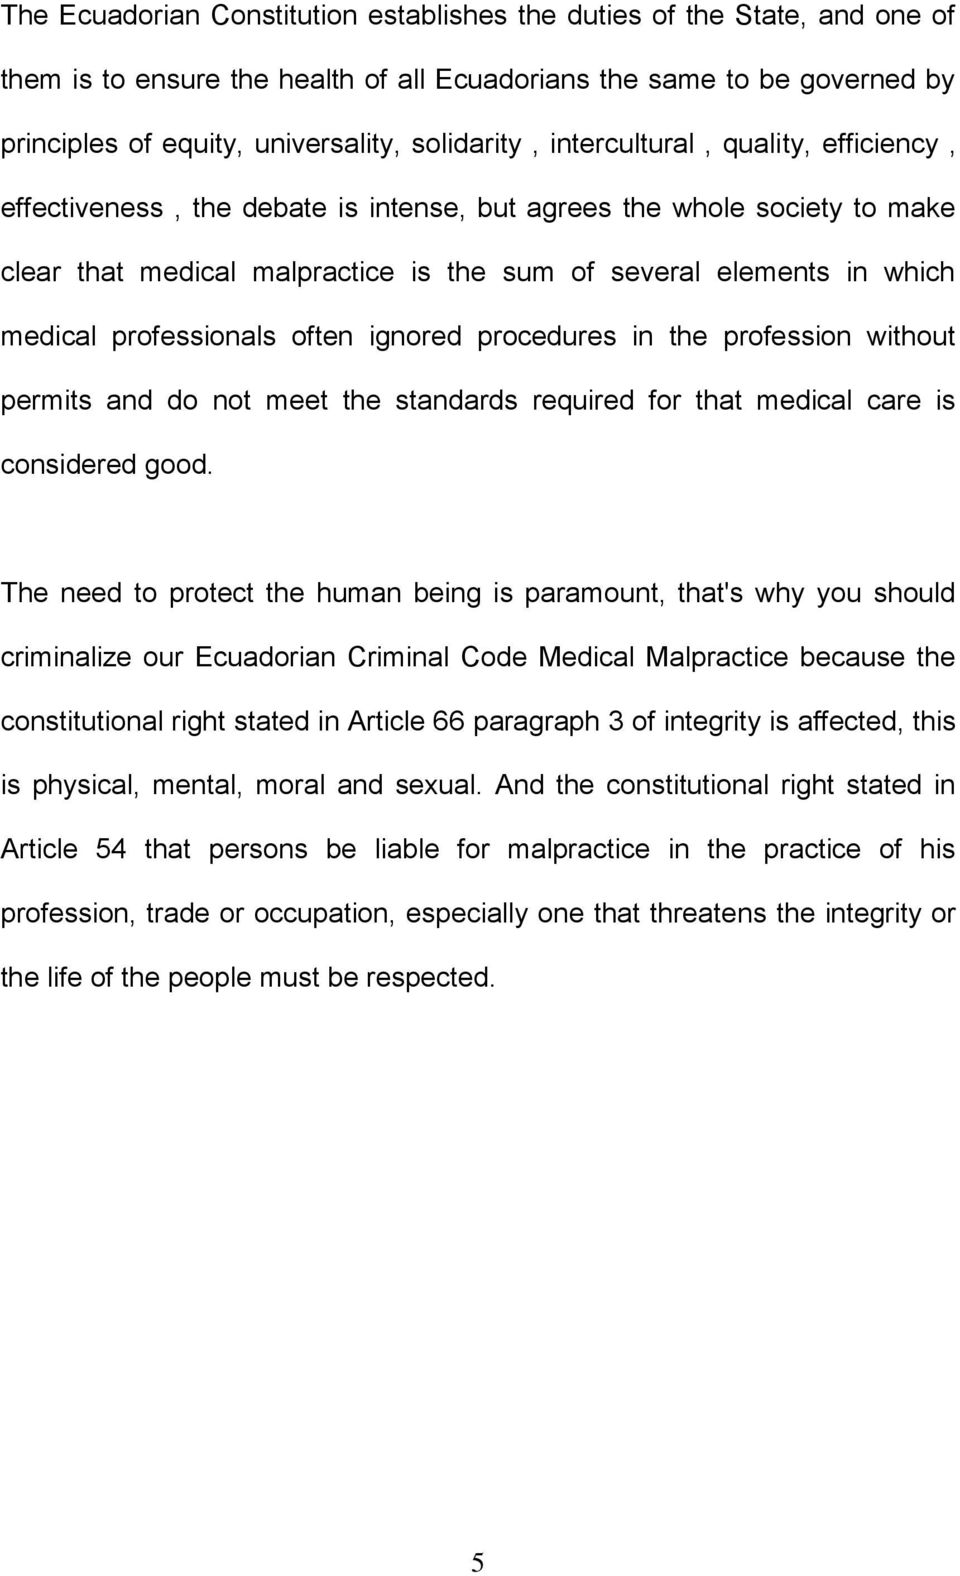 professionals often ignored procedures in the profession without permits and do not meet the standards required for that medical care is considered good.